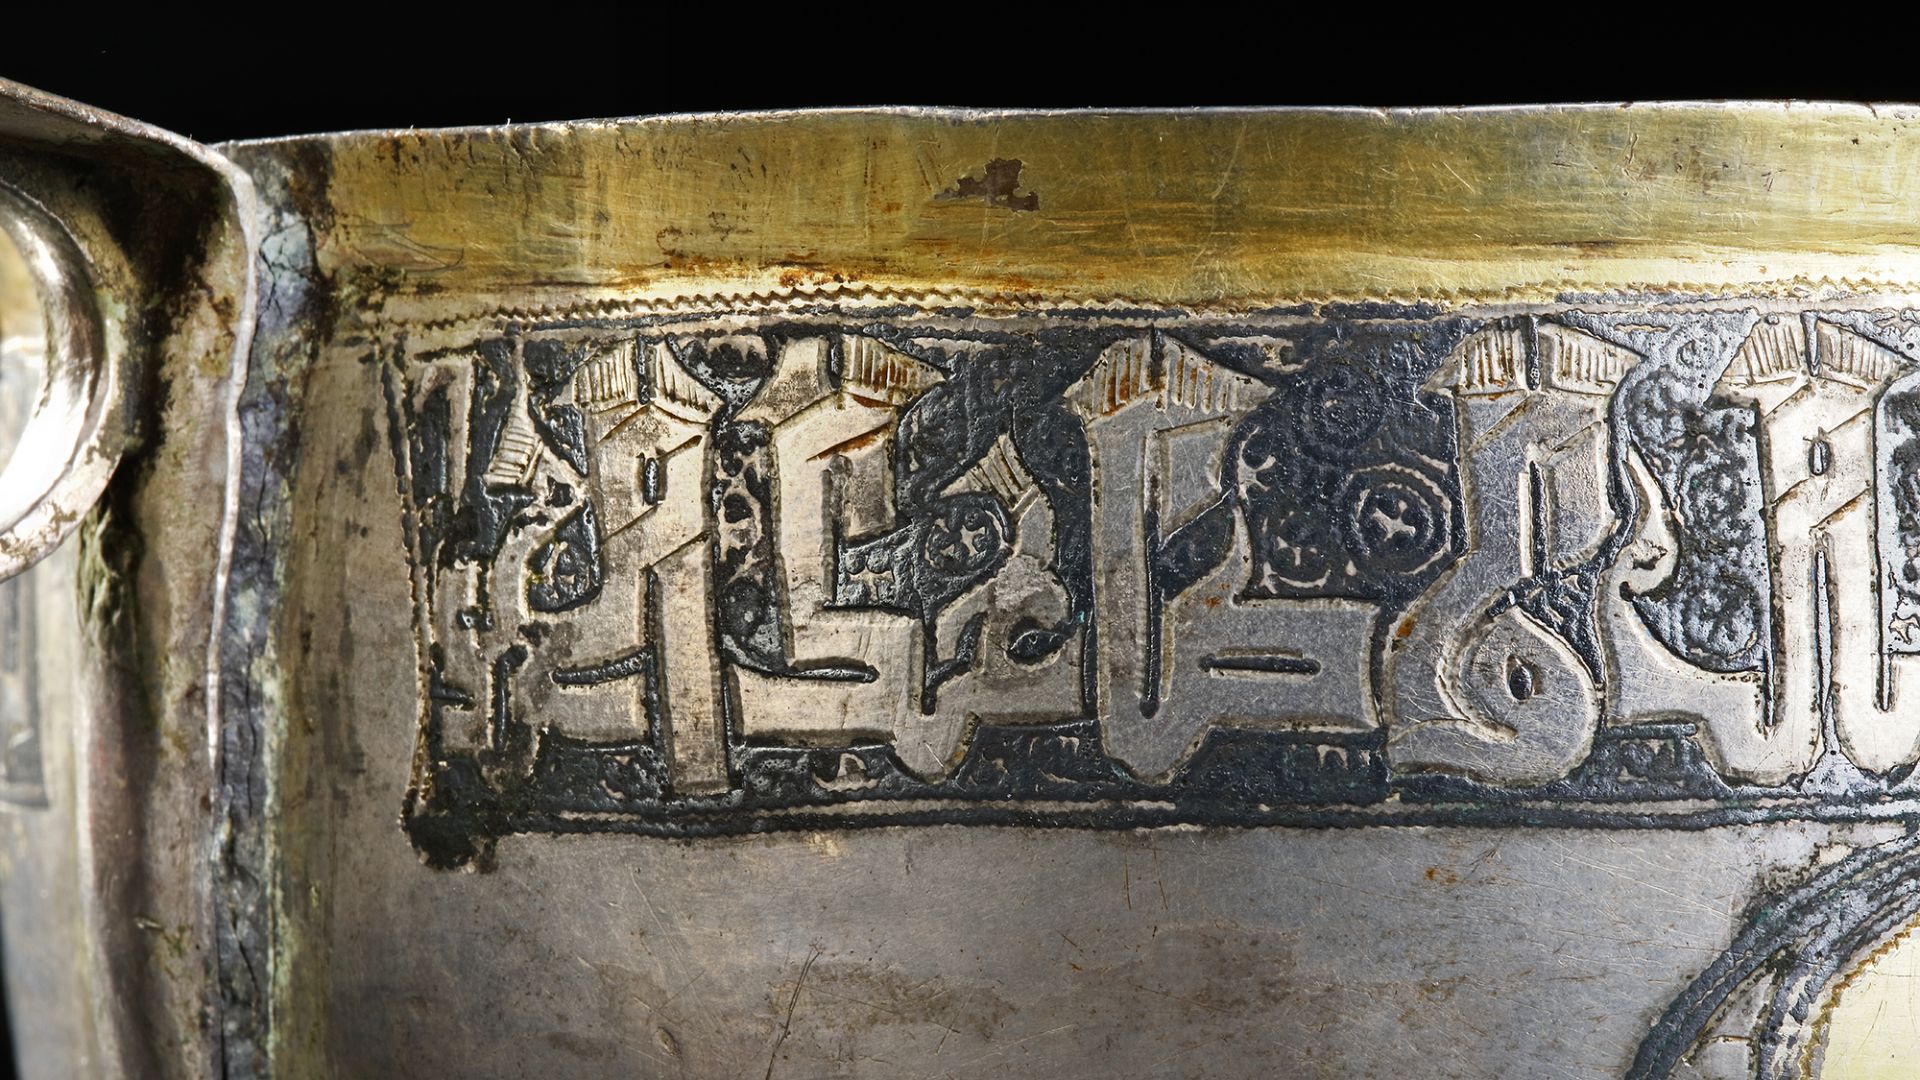 A RARE SILVER AND NIELLOED CUP WITH KUFIC INSCRIPTION, PERSIA OR CENTRAL ASIA, 11TH-12TH CENTURY - Image 33 of 34